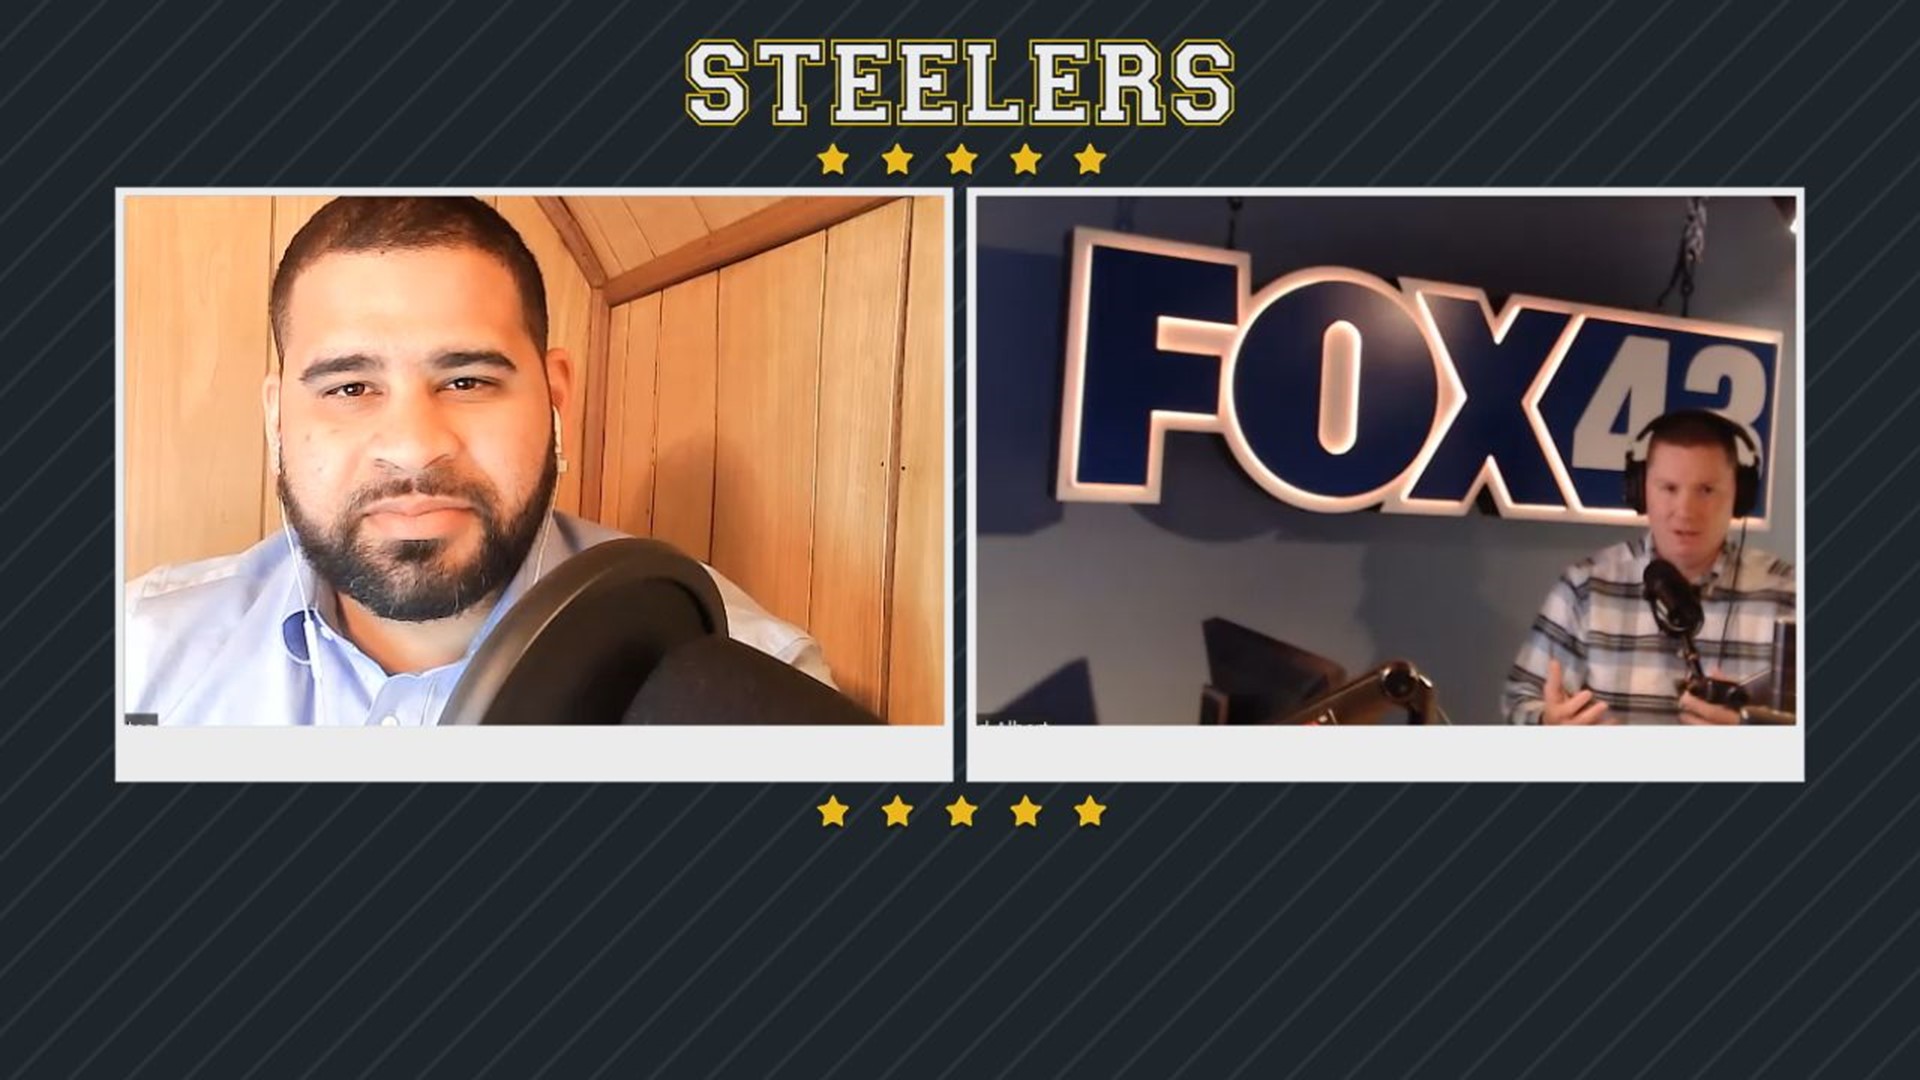 'Locked On Steelers' podcast host Christopher Carter joins FOX43 to talk about the upcoming NFL Draft and the possible moves the Steelers could make later this week.